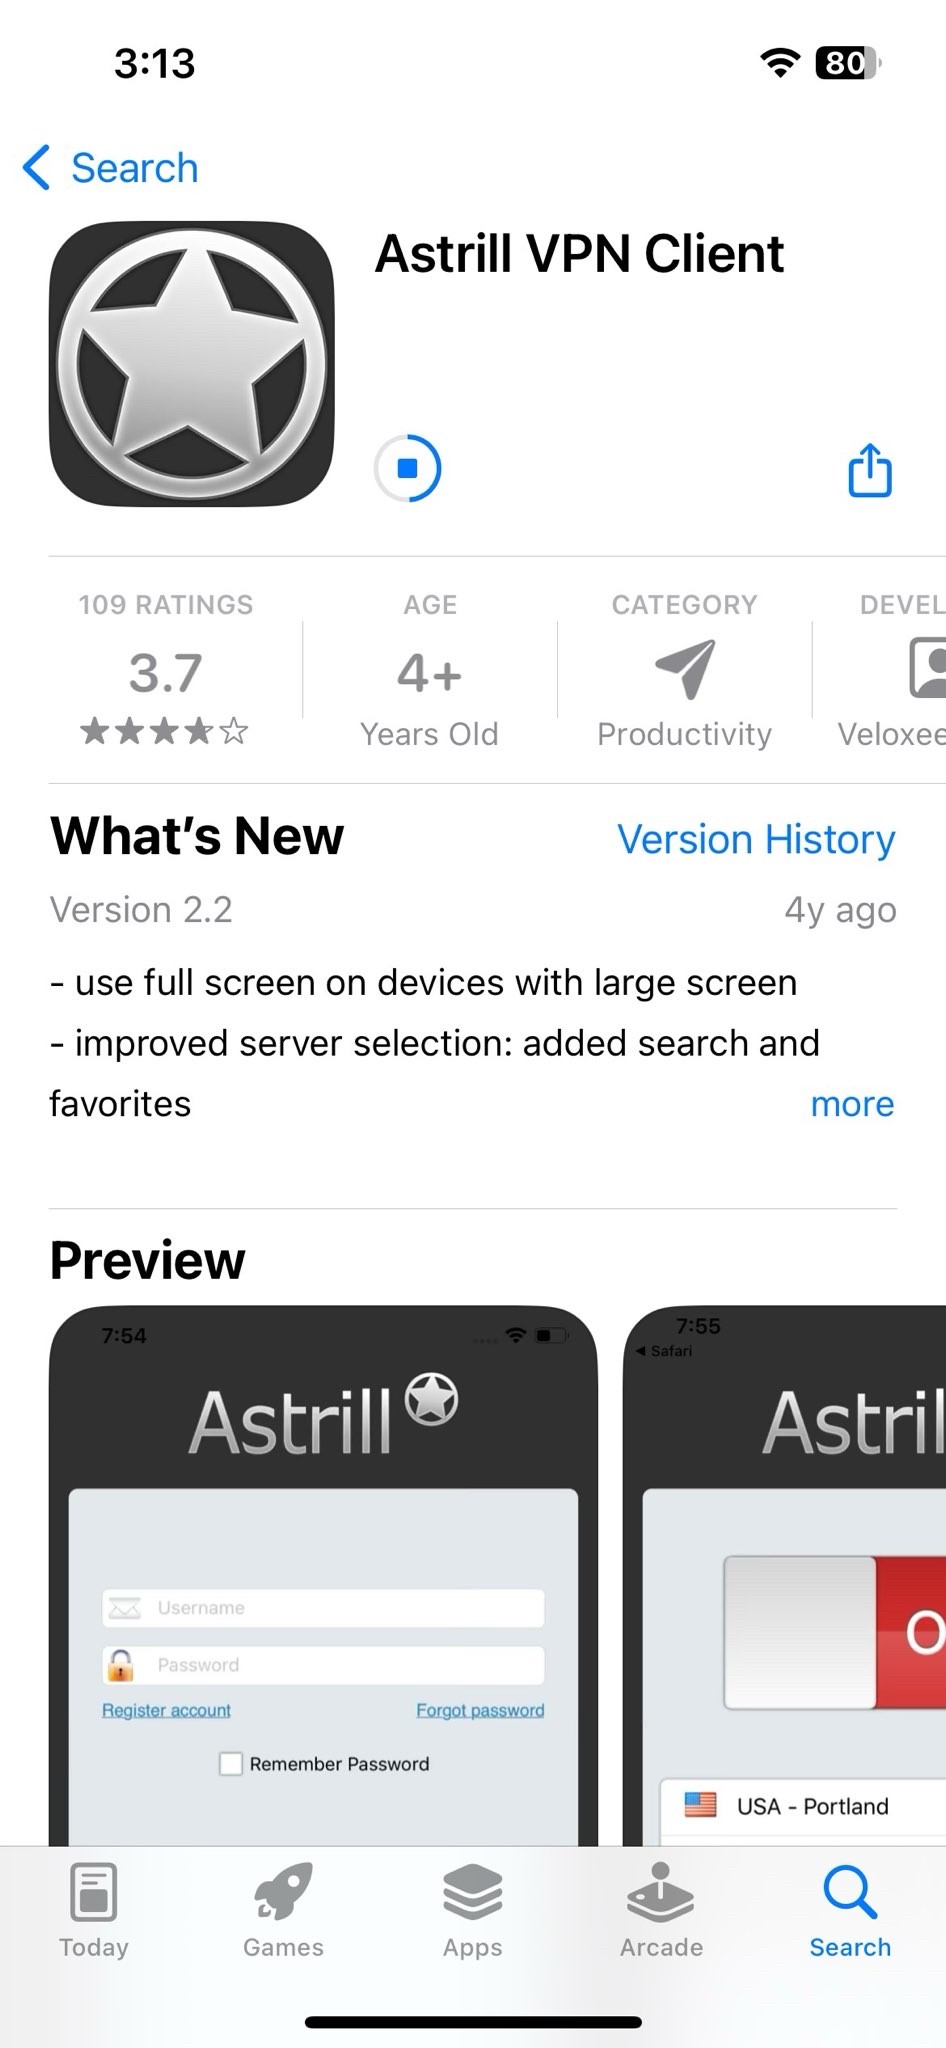 AstrillVPN app on your device